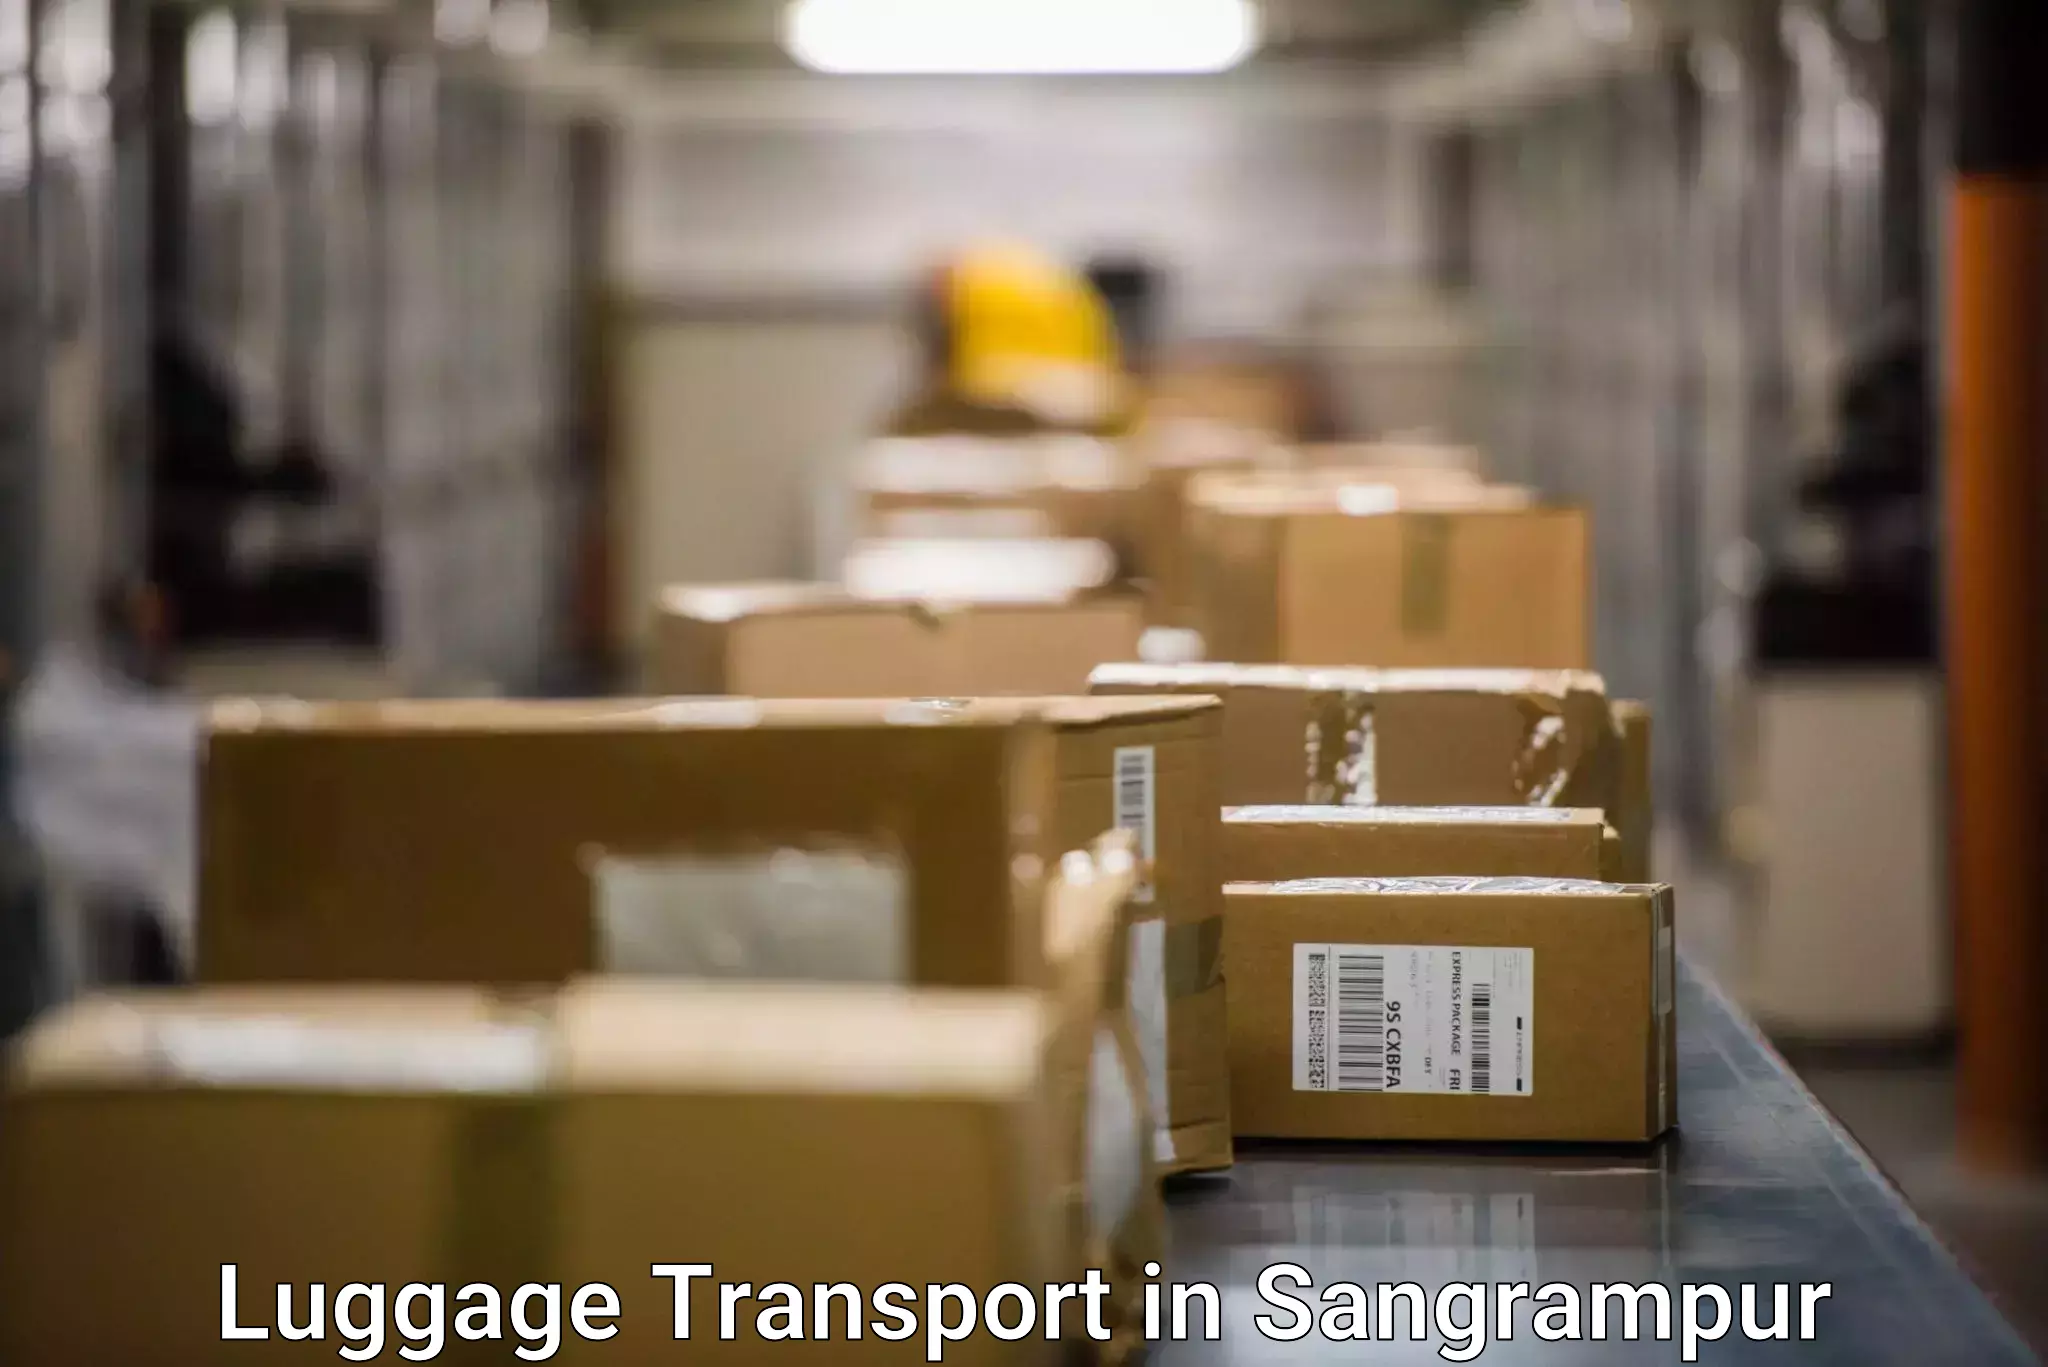 Luggage delivery providers in Sangrampur